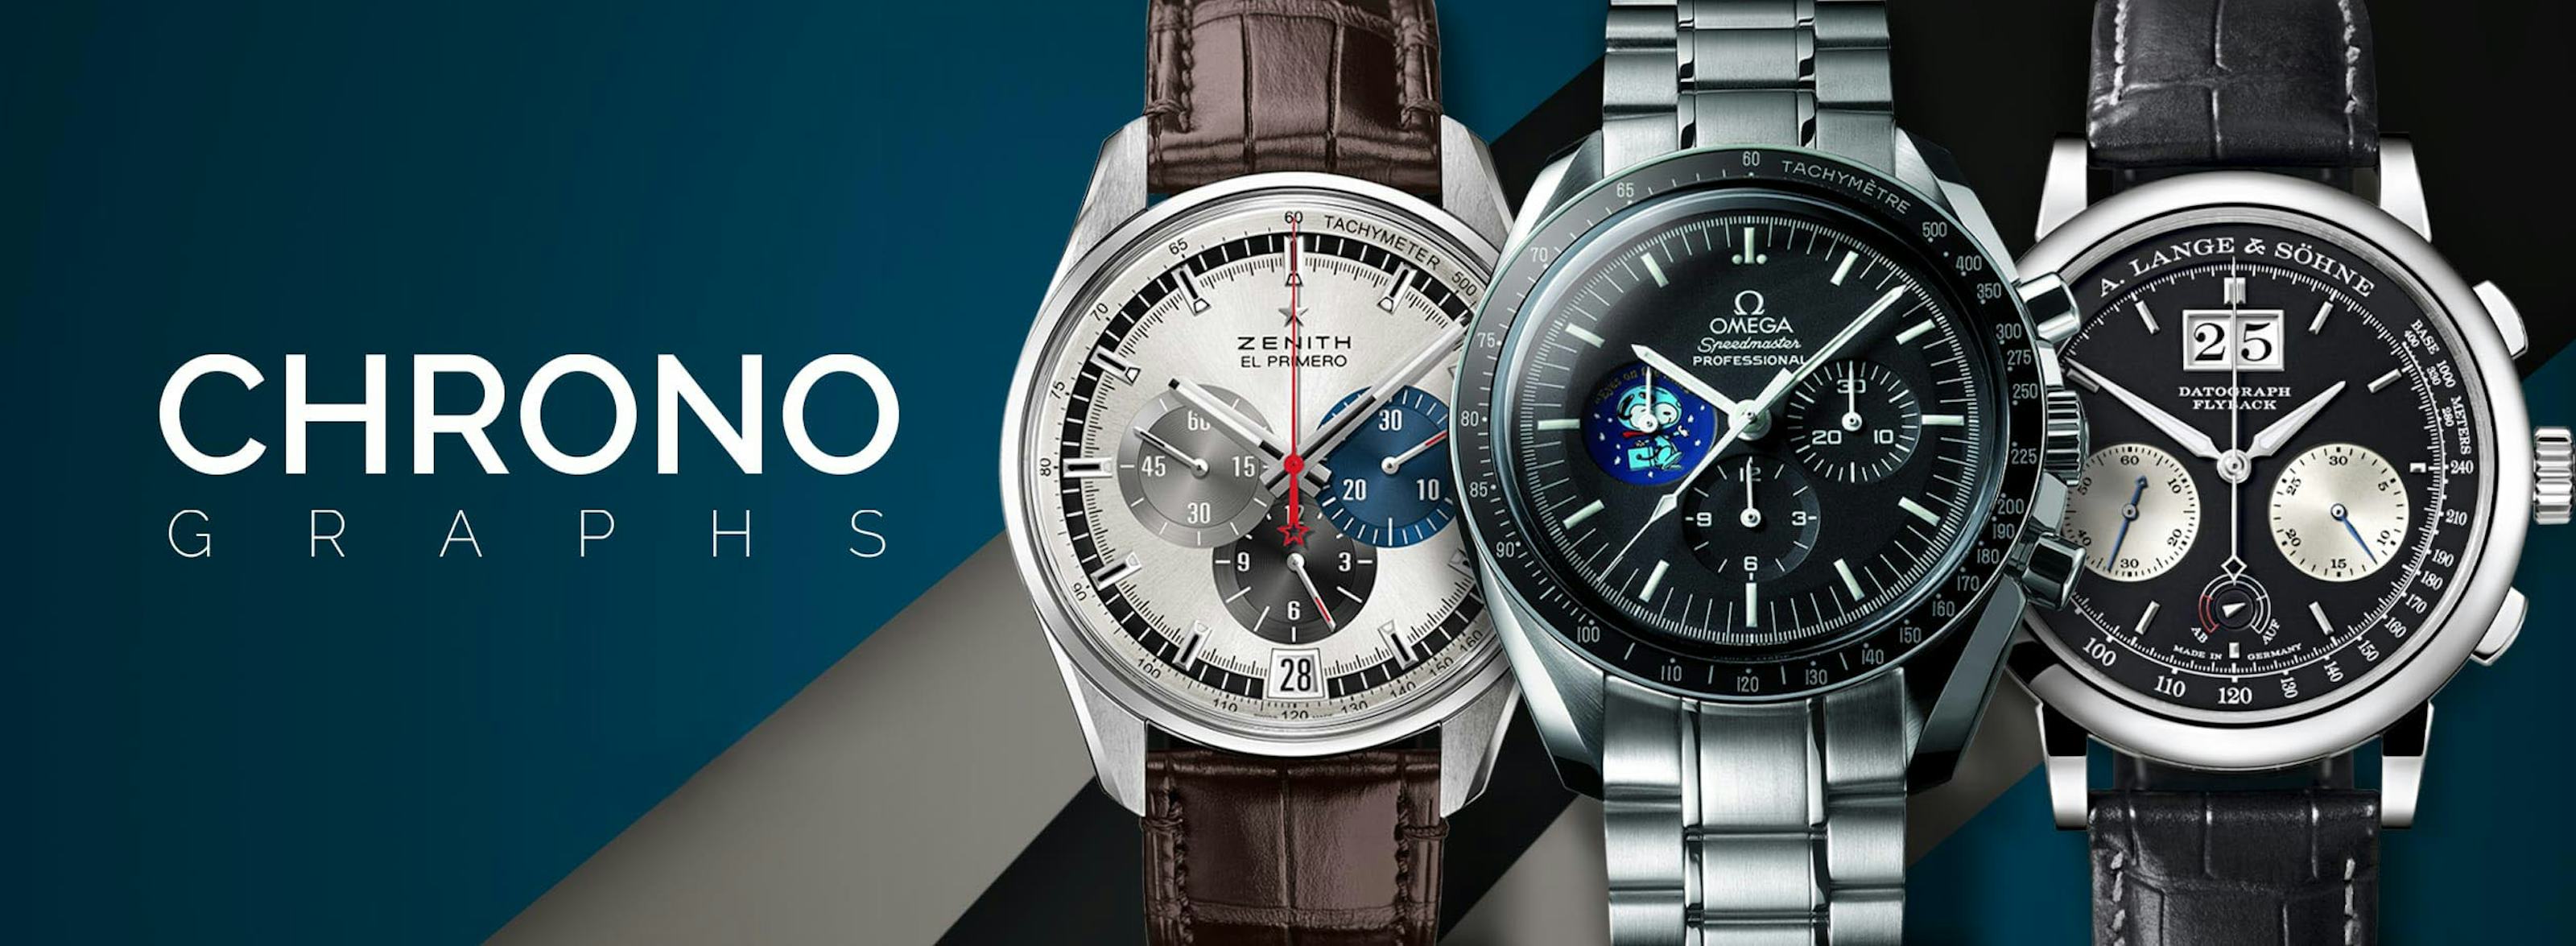 Video: Different Types of Chronographs Explained